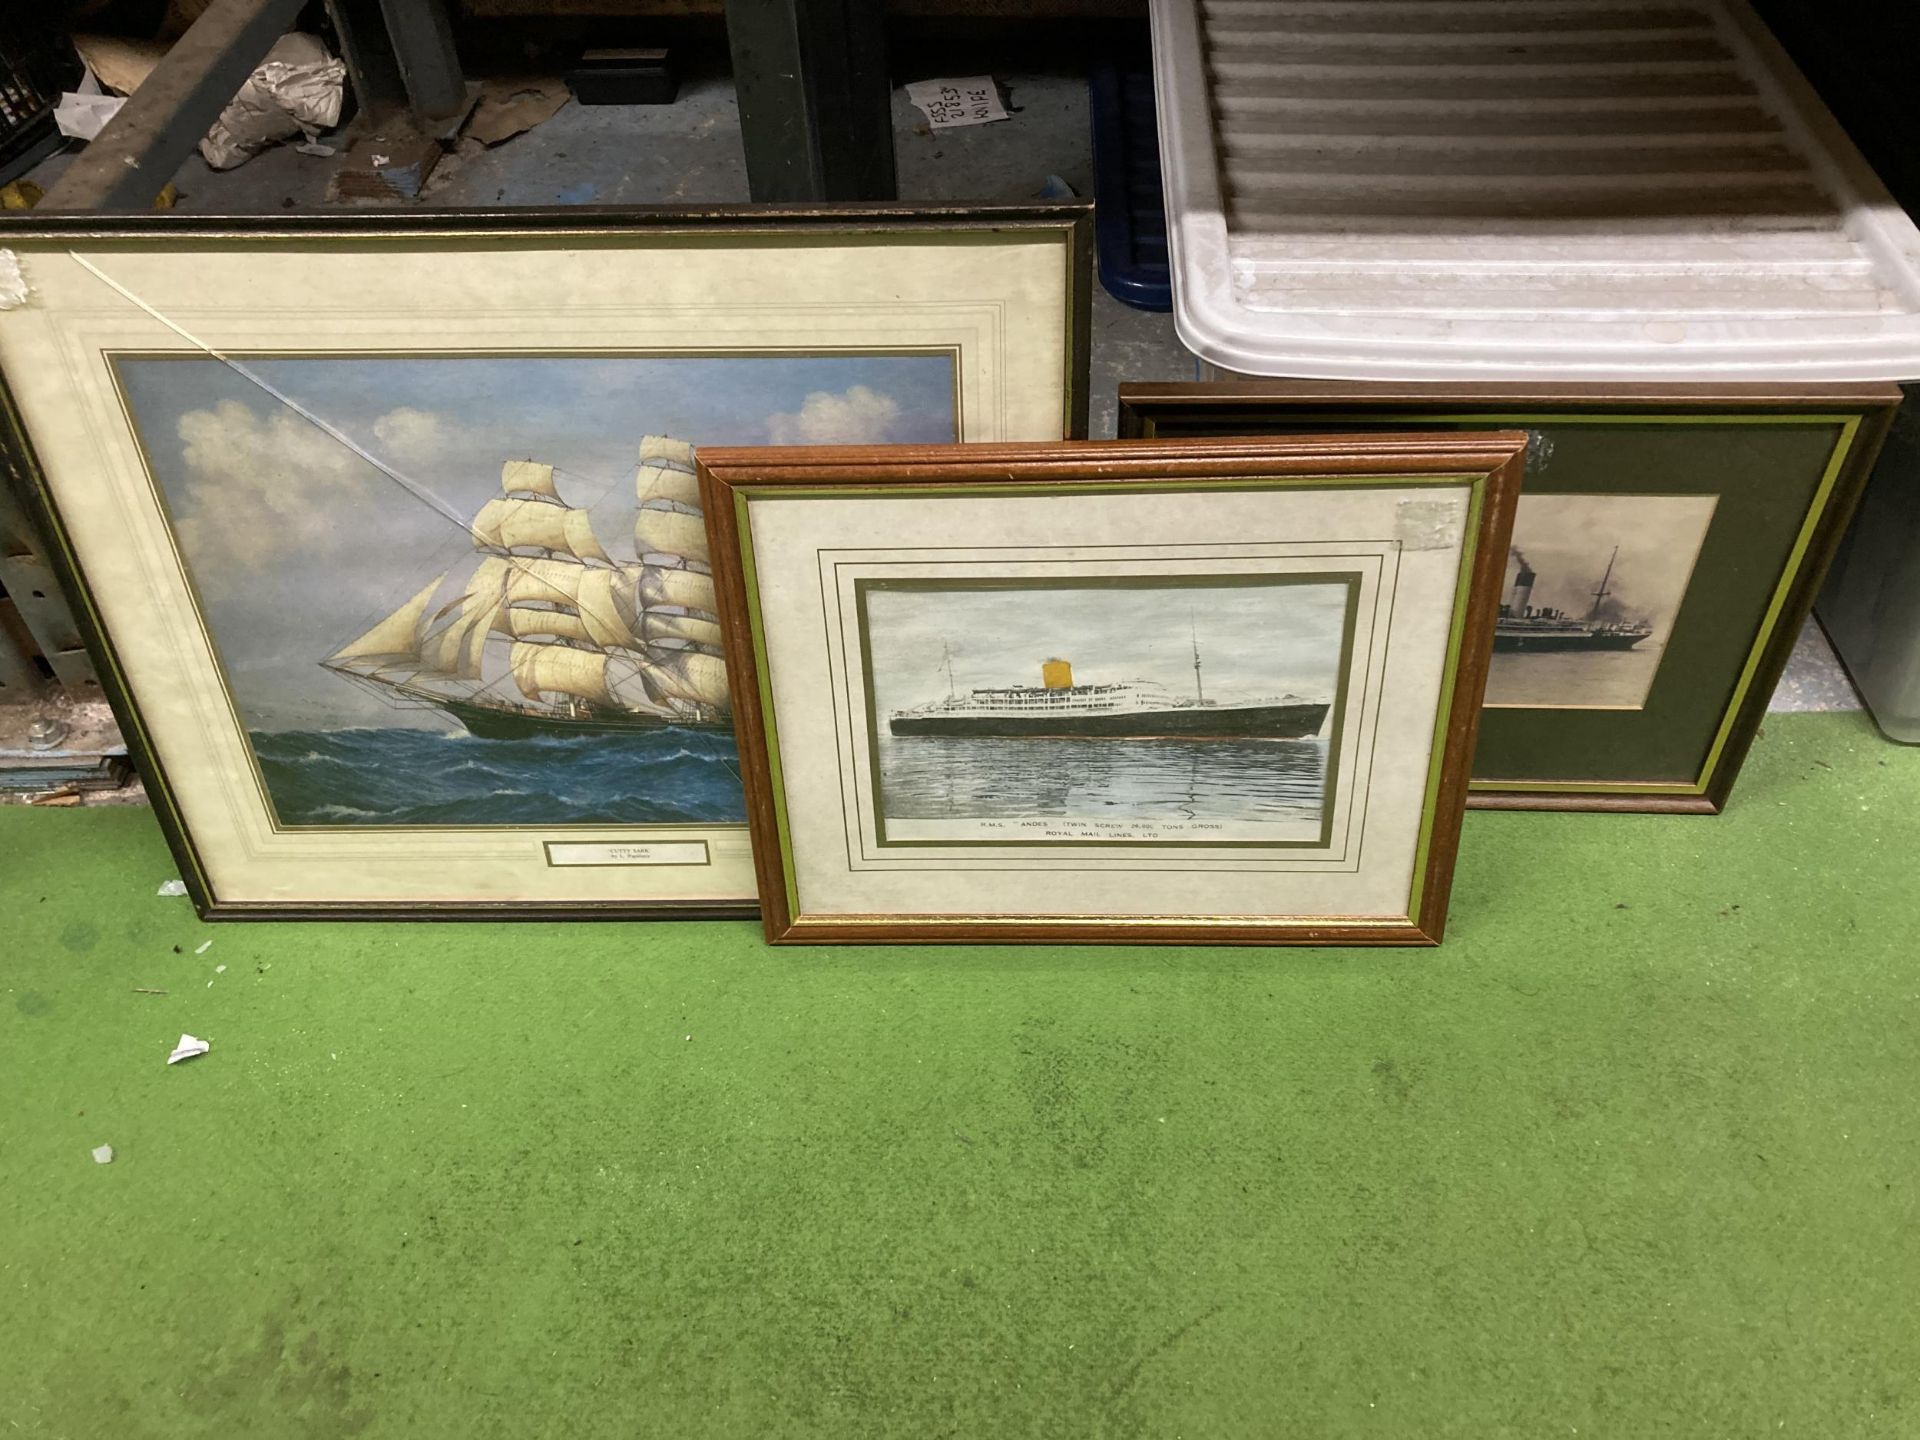 A GROUP OF THREE FRAMED NAUTICAL SCENE PRINTS, R.M.S ANDES, CUTTY SARK AND OTHER